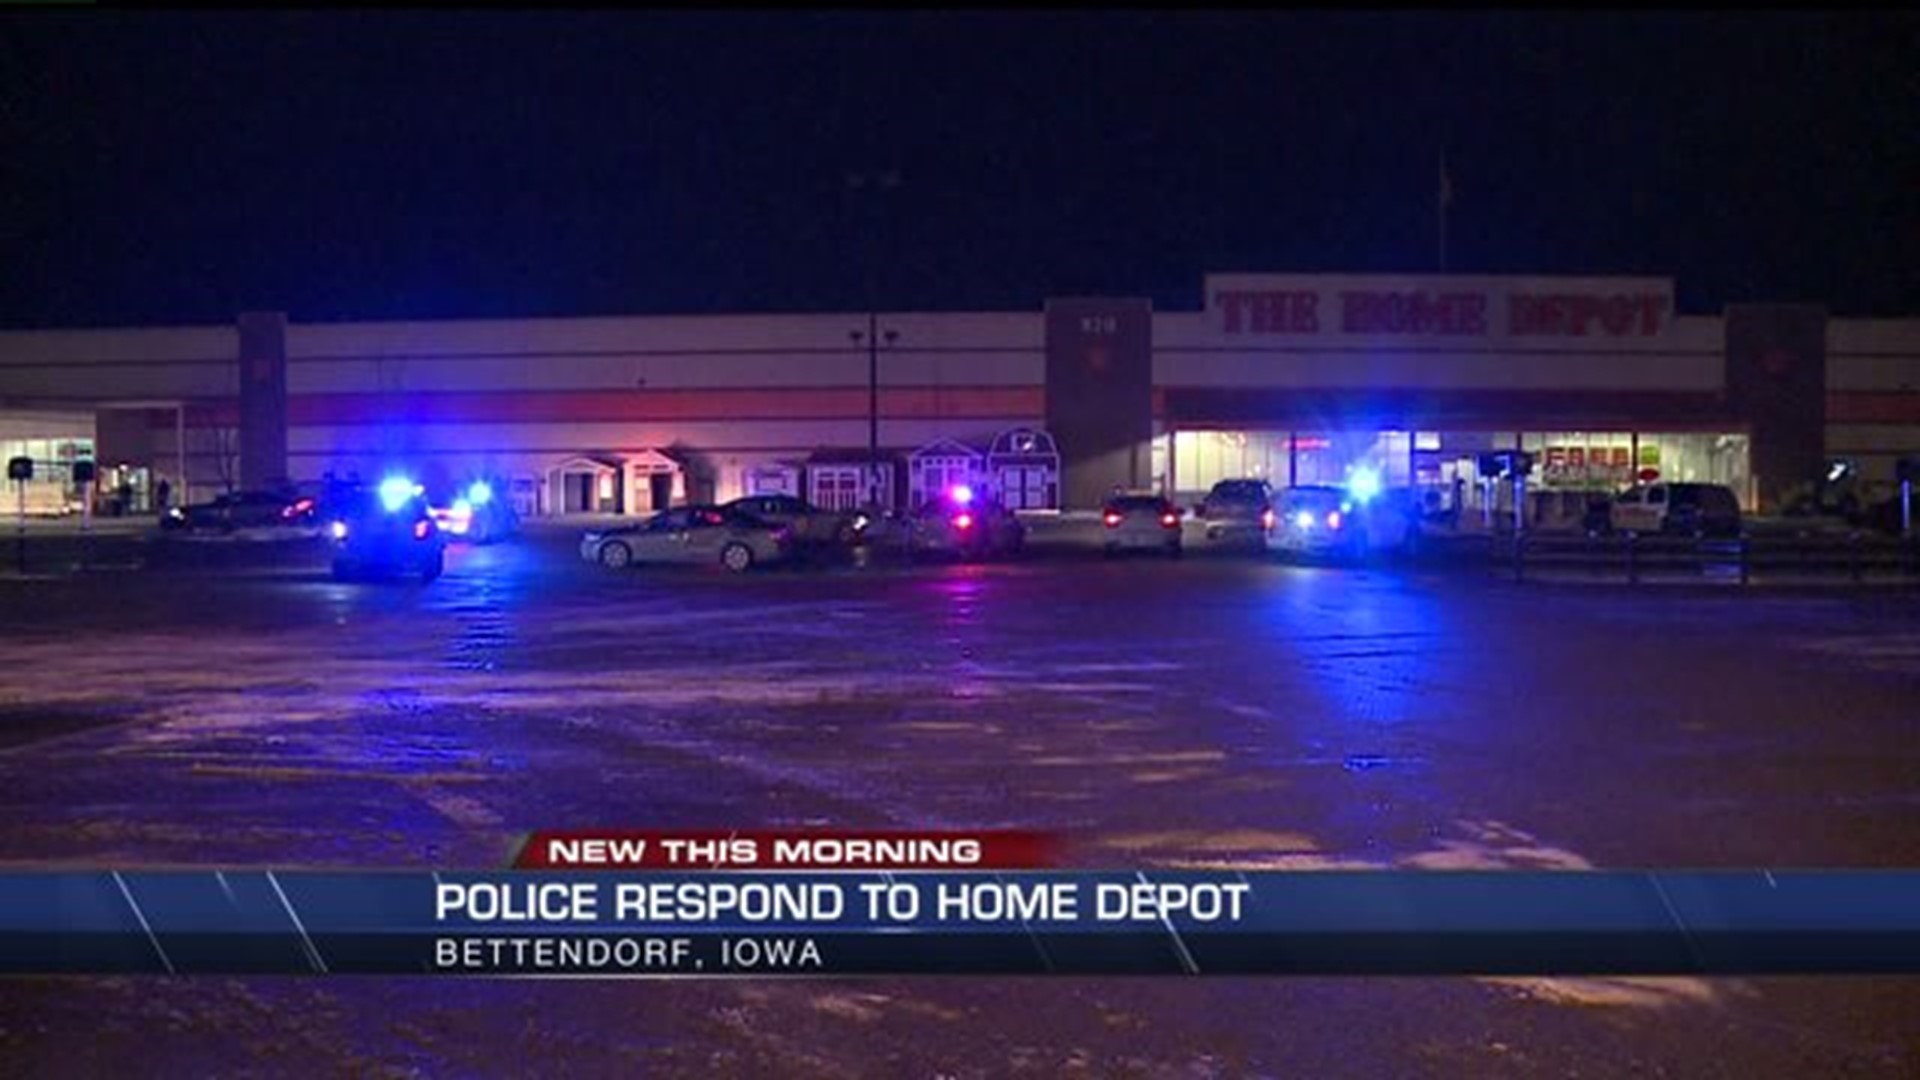 Officer-Involved Shooting at Home Depot